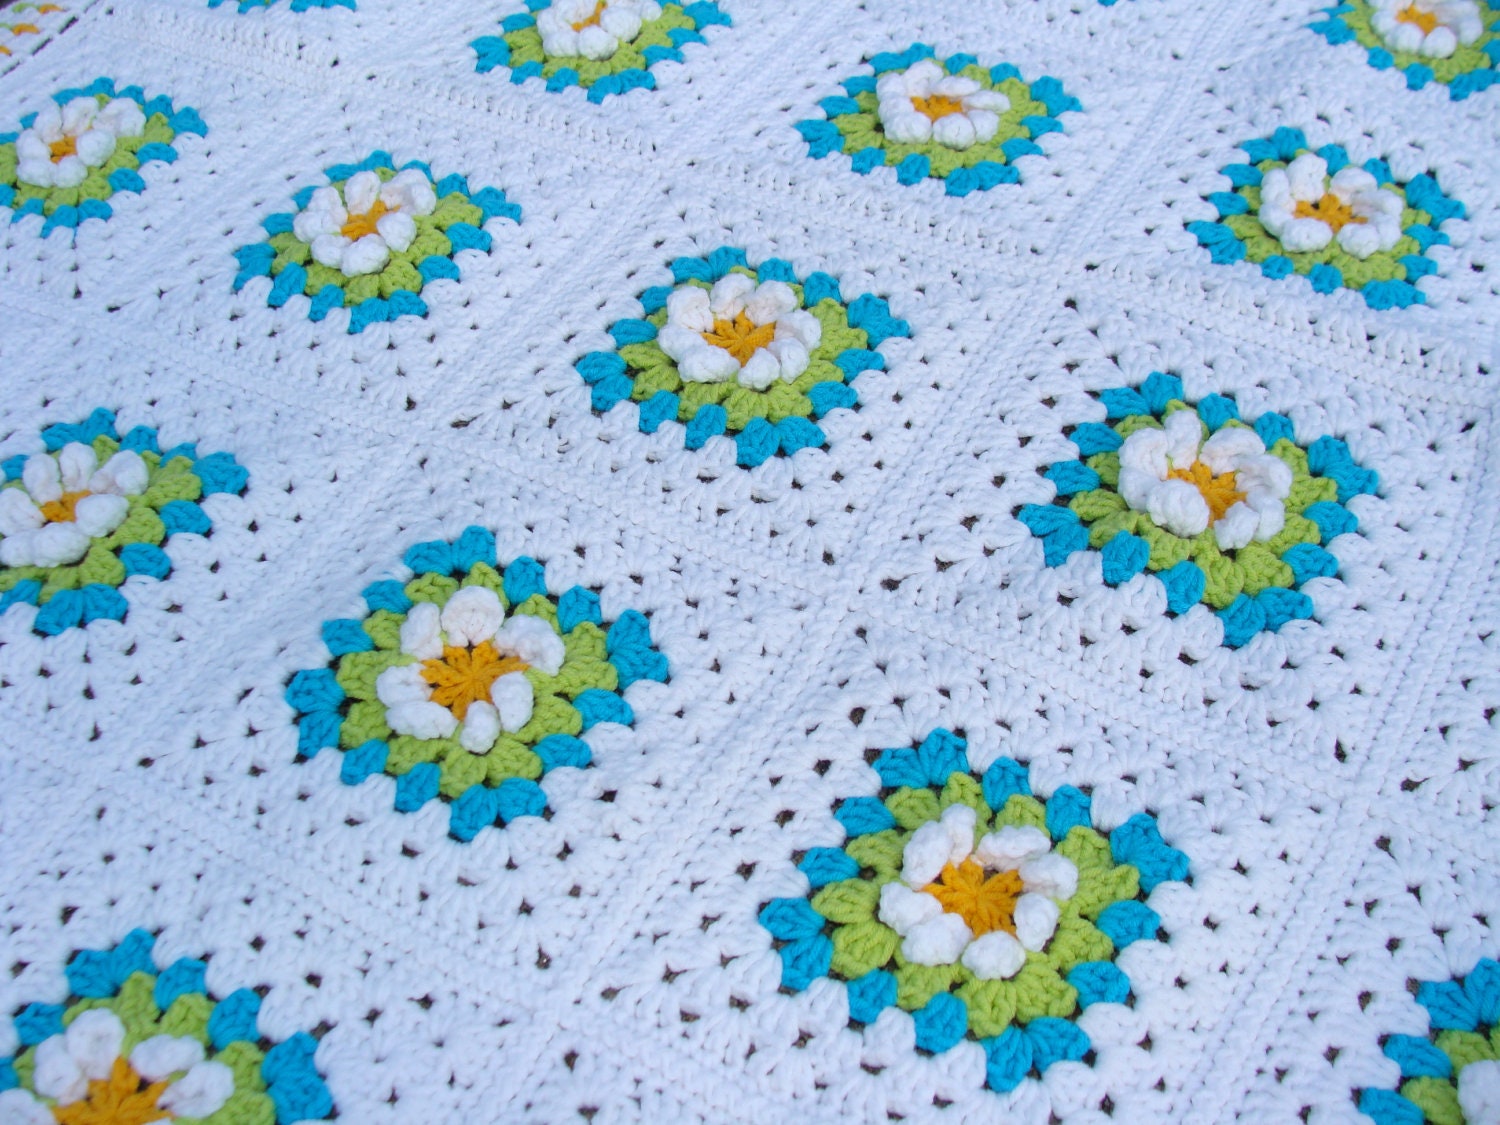 Crochet Flowers Baby Blanket Granny Square White Yellow Green Turquoise Blue Spring Summer Home Decor by dodofit on Etsy - hopeblankets